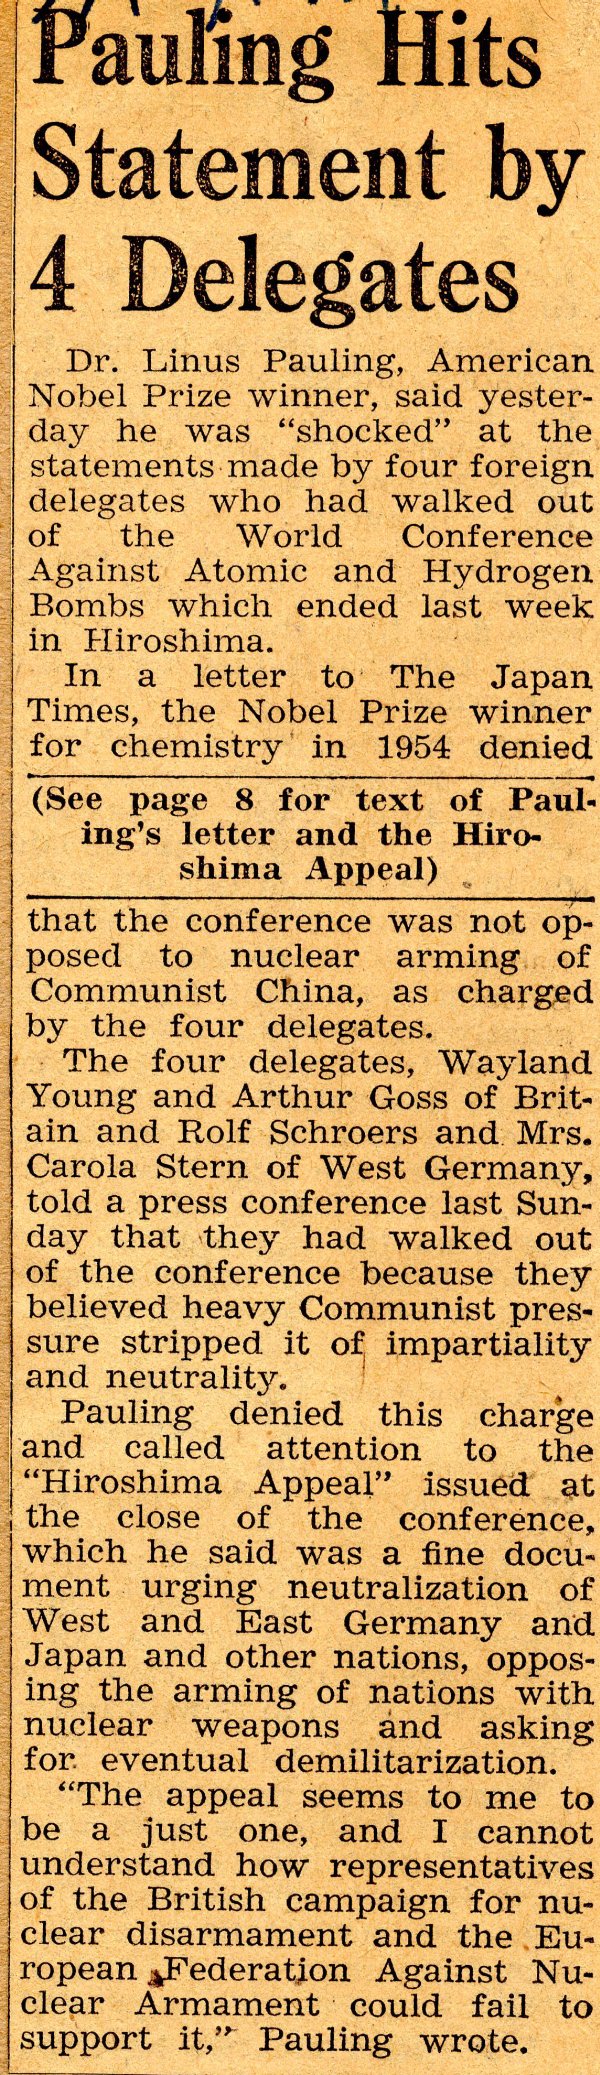 "Pauling Hits Statement by 4 Delegates." Page 1. August 14, 1959